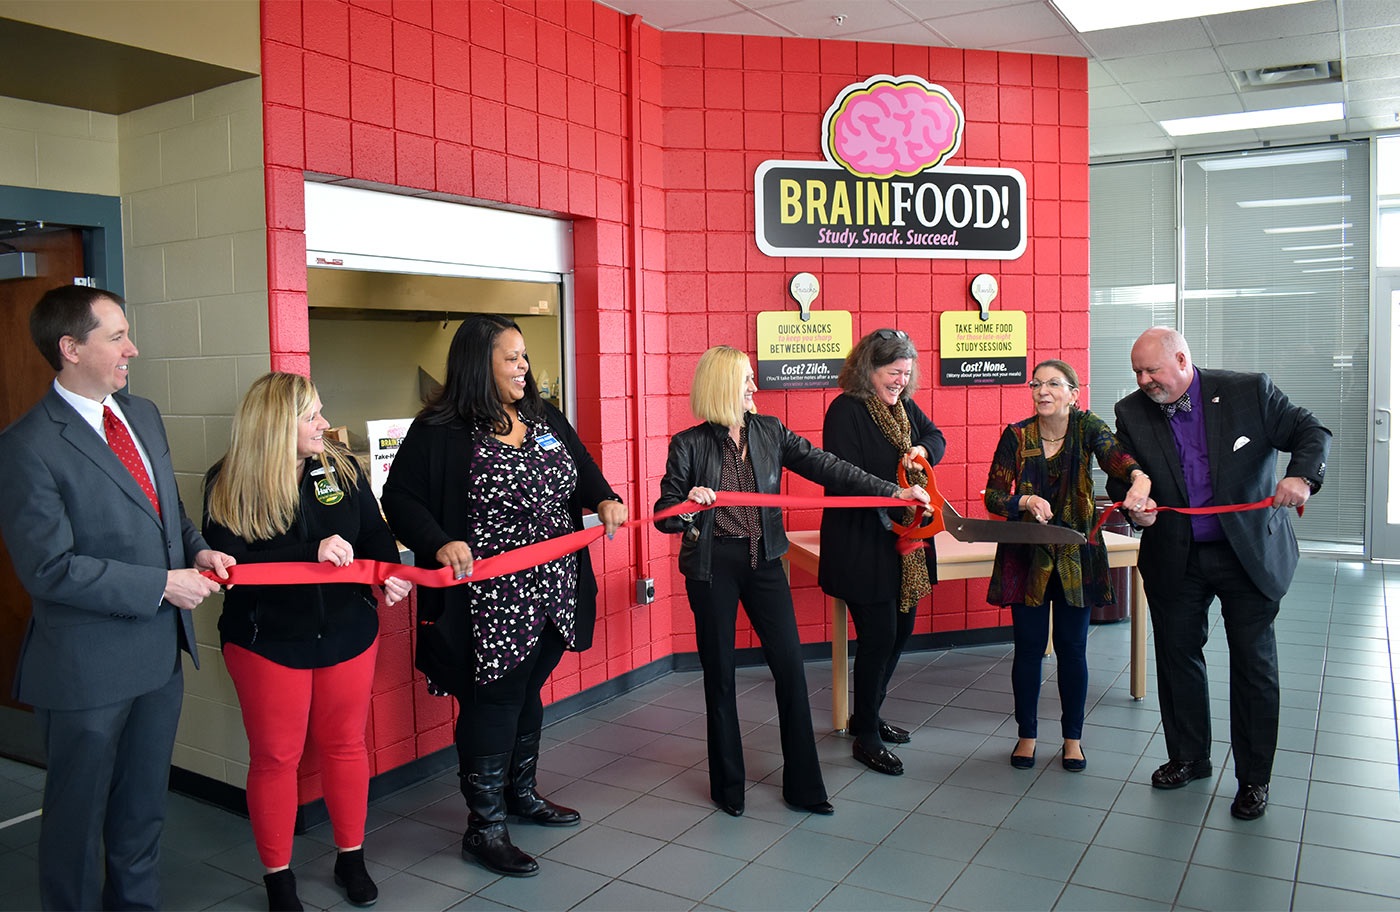 Sue Byrne, third from right, cuts the ribbon for the new “Brain Food” pantry, located in Roane State’s Coffey/McNally Building in Oak Ridge. She is the assistant project manager for the First Presbyterian Church of Oak Ridge’s partnership to help stock the campus’s pantry. From left: Scott Niermann, executive director of the Roane State Foundation; Kristie Hopwood, agency relations coordinator for Second Harvest Food Bank of East Tennessee; Kara Allen, an assistant manager of the Kroger Store in Oak Ridge; Melissa Eads, corporate affairs manager for the Kroger Nashville Division; Sue Byrne; Karen Brunner, vice president of Roane State Institutional Effectiveness and Research; and Roane State President Chris Whaley.